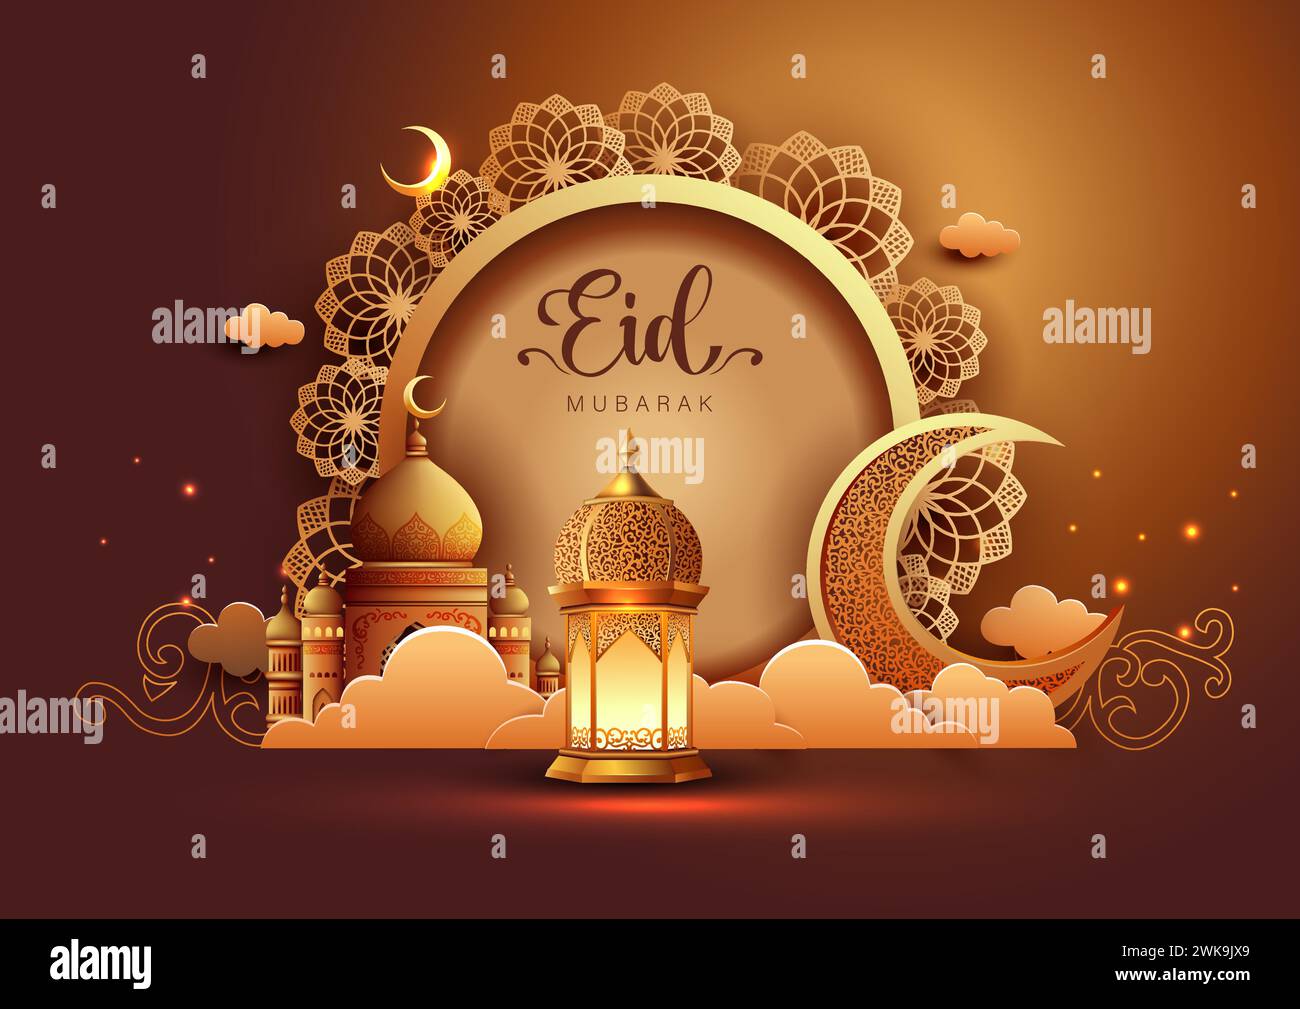 Eid Mubarak Muslim art greetings with golden mosque and brown background wallpaper. abstract vector illustration design. Stock Vector